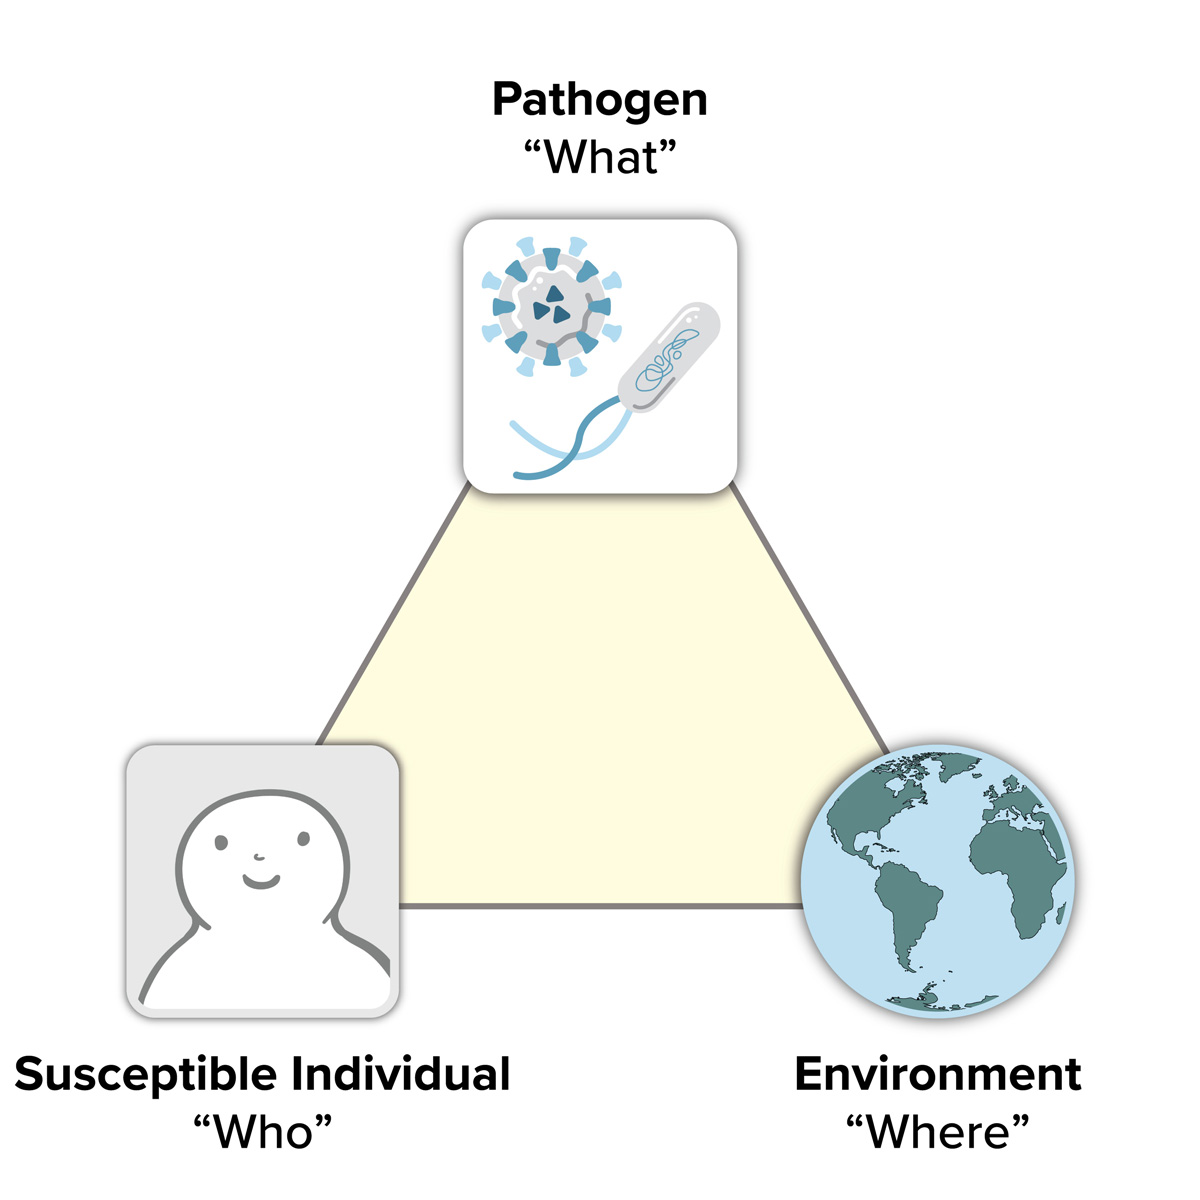 A triangle with the 3 points labeled as: a susceptible individual as "who", a pathogen as "what", and the environment as "where."